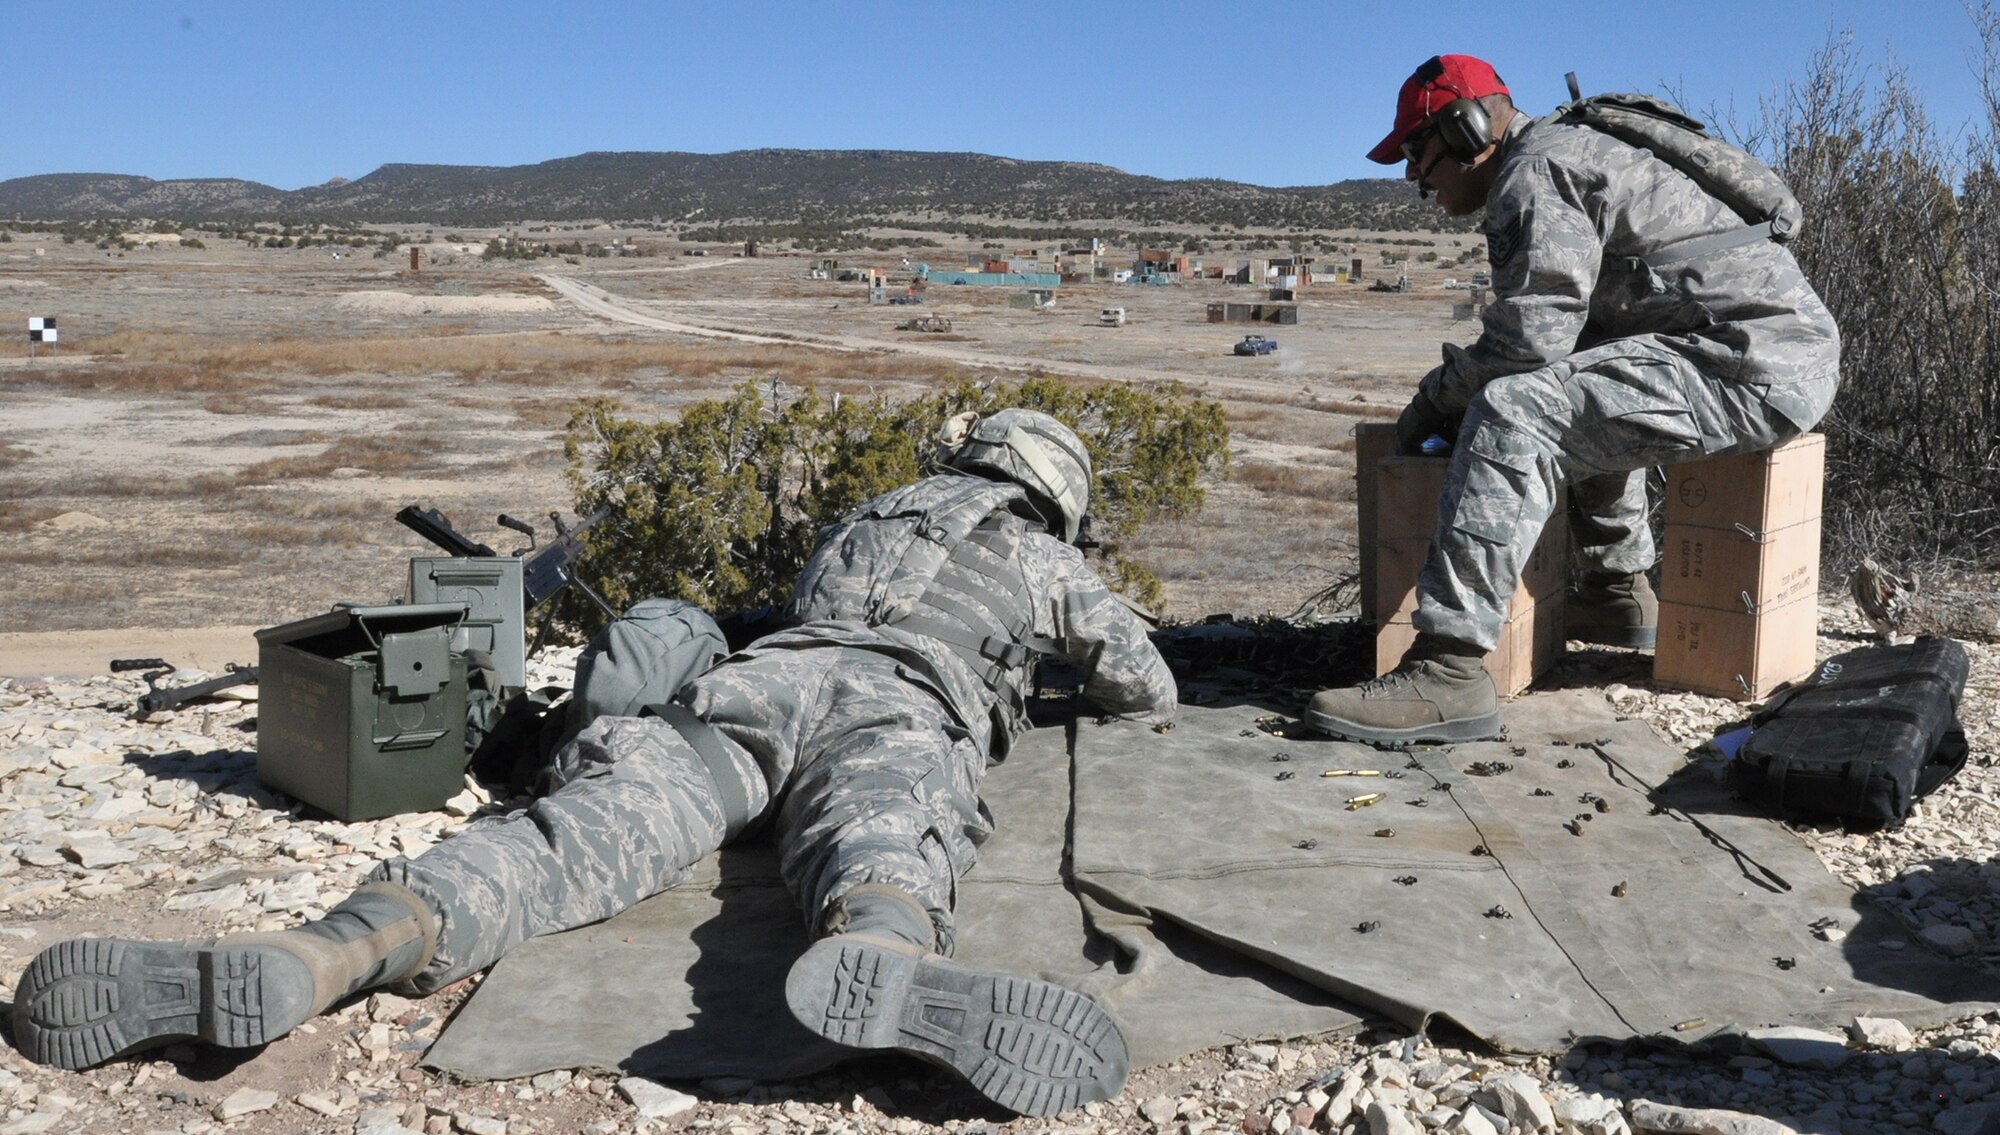 Tech. Sgt. Jose Medellin, noncommissioned officer in charge of 302nd Security Forces Squadron combat arms, right, gives instruction to Senior Airman Steven Raeburn, fire team member, on the M249 machine gun during a visit to Starburst Range near Pueblo West, Colo. Feb 2, 2015. Staying trained and qualified helped the 302nd SFS to be named the Air Force Reserve Command’s Outstanding Security Forces Unit (tenant) for 2014. (U.S. Air Force photo/Master Sgt. Daniel Butterfield)
